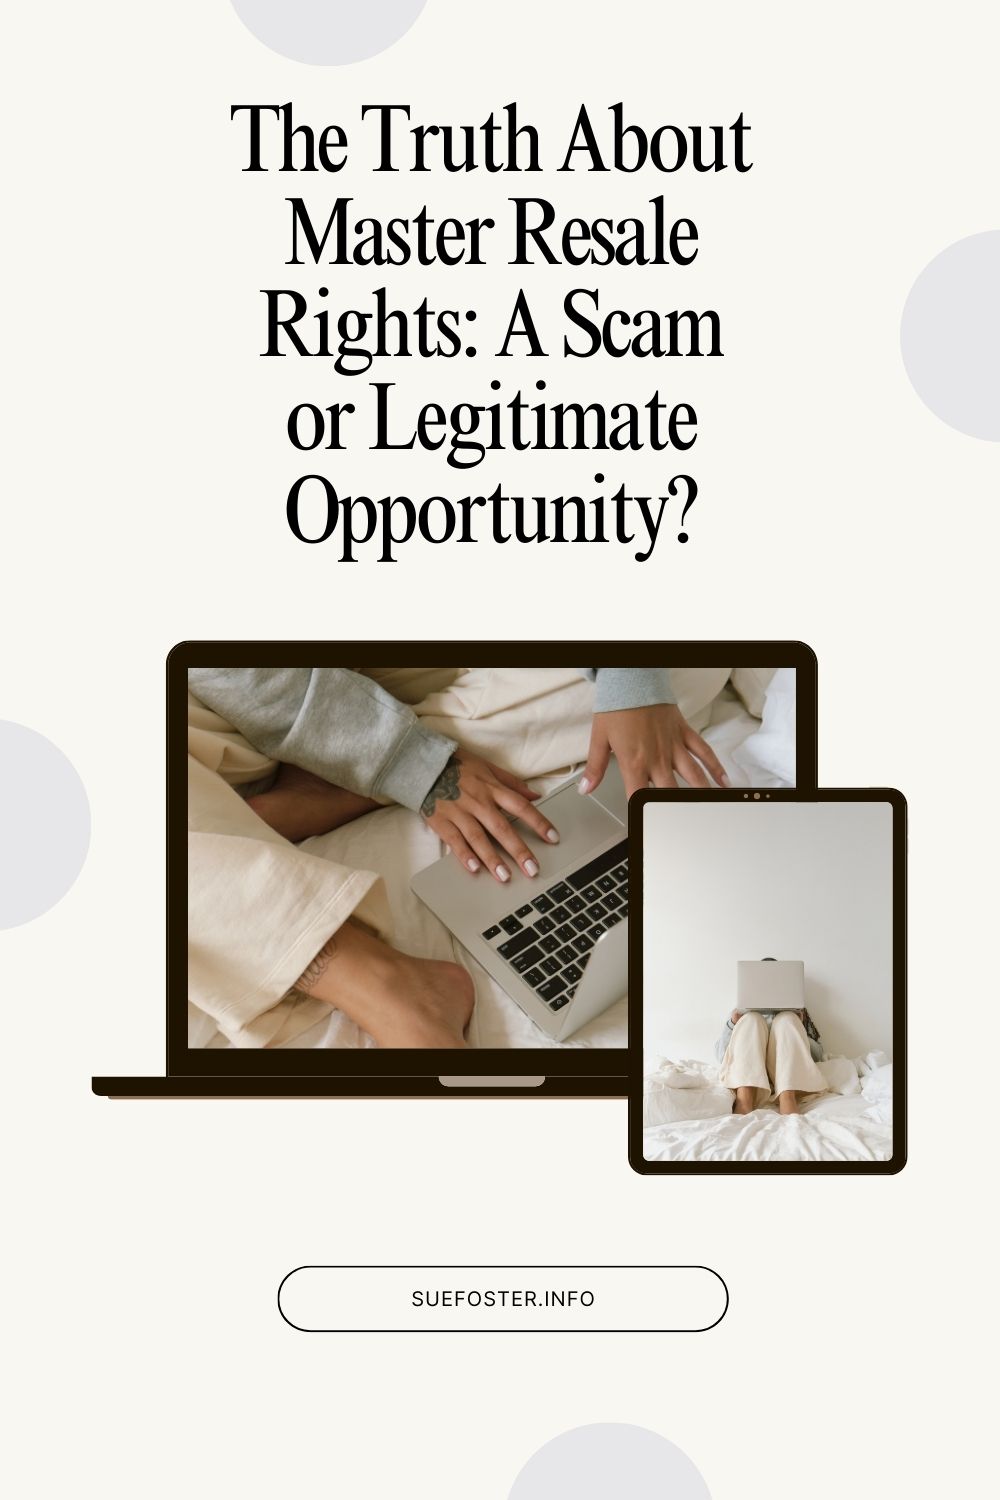 The Truth About Master Resale Rights A Scam or Legitimate Opportunity (1)